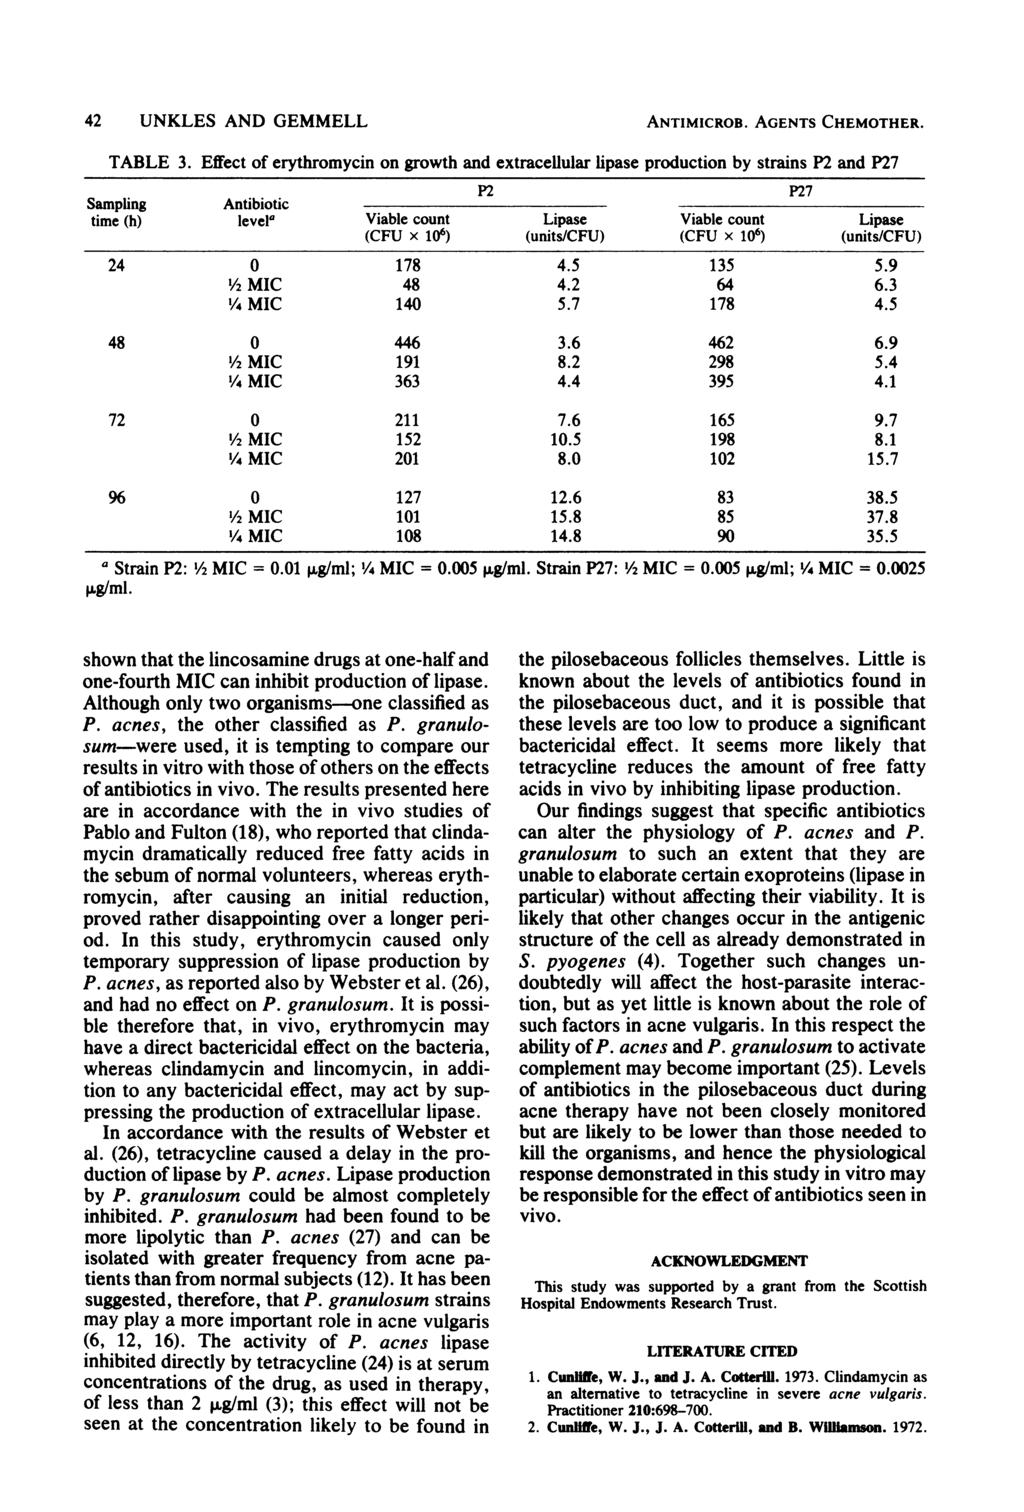 42 UNKLES AND GEMMELL TABLE 3. Effect of erythromycin on growth and extracellular lipase production by strains and time (h) levela Viable count Lipase Viable count Lipase 24 0 178 4.5 135 5.